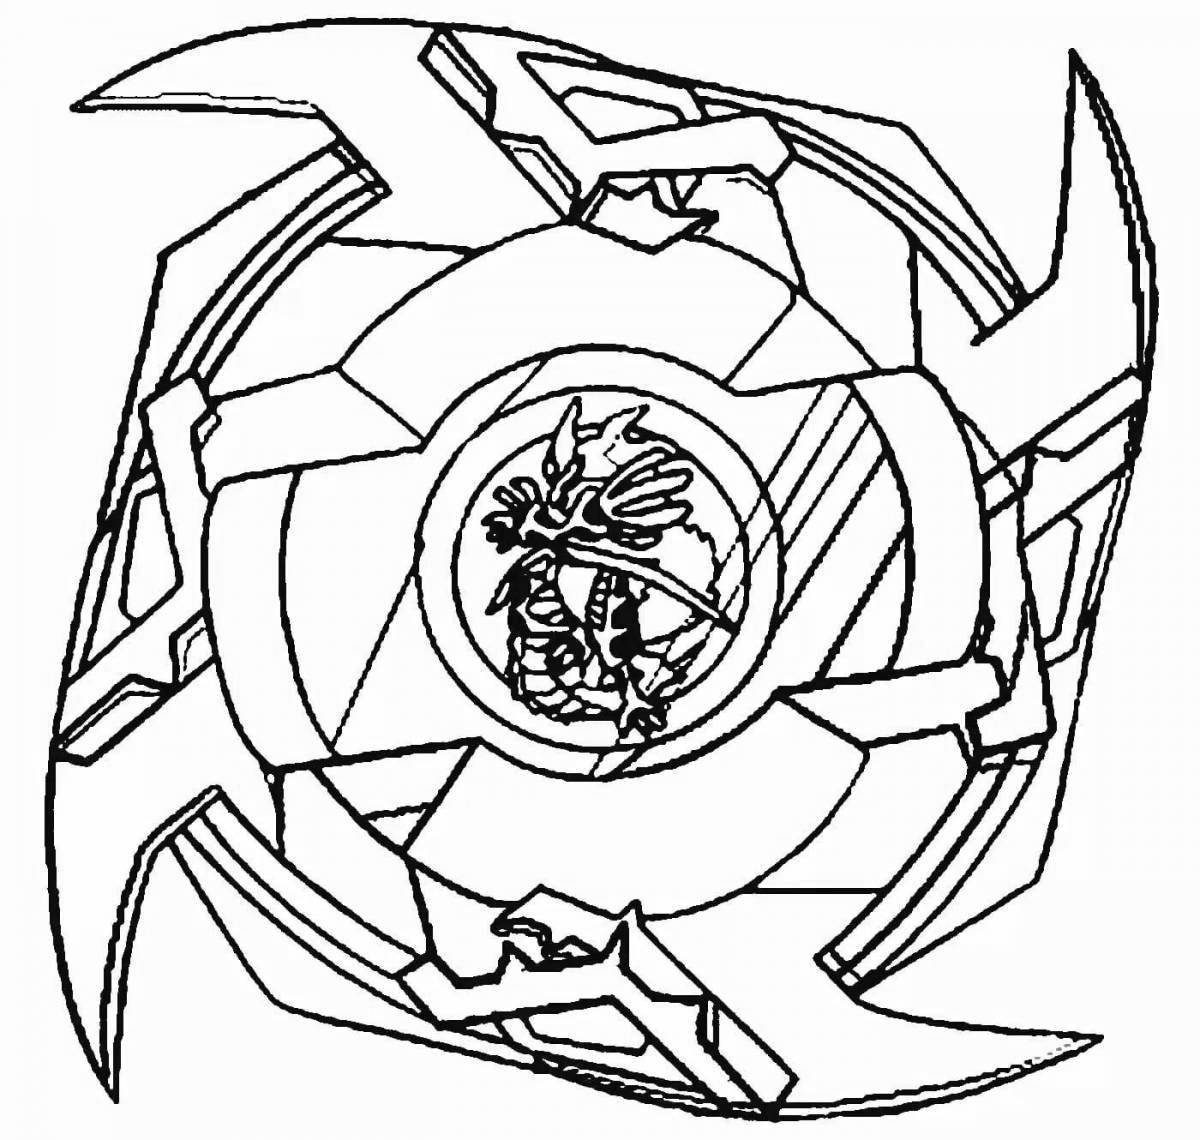 Coloring page bewitching spinning top